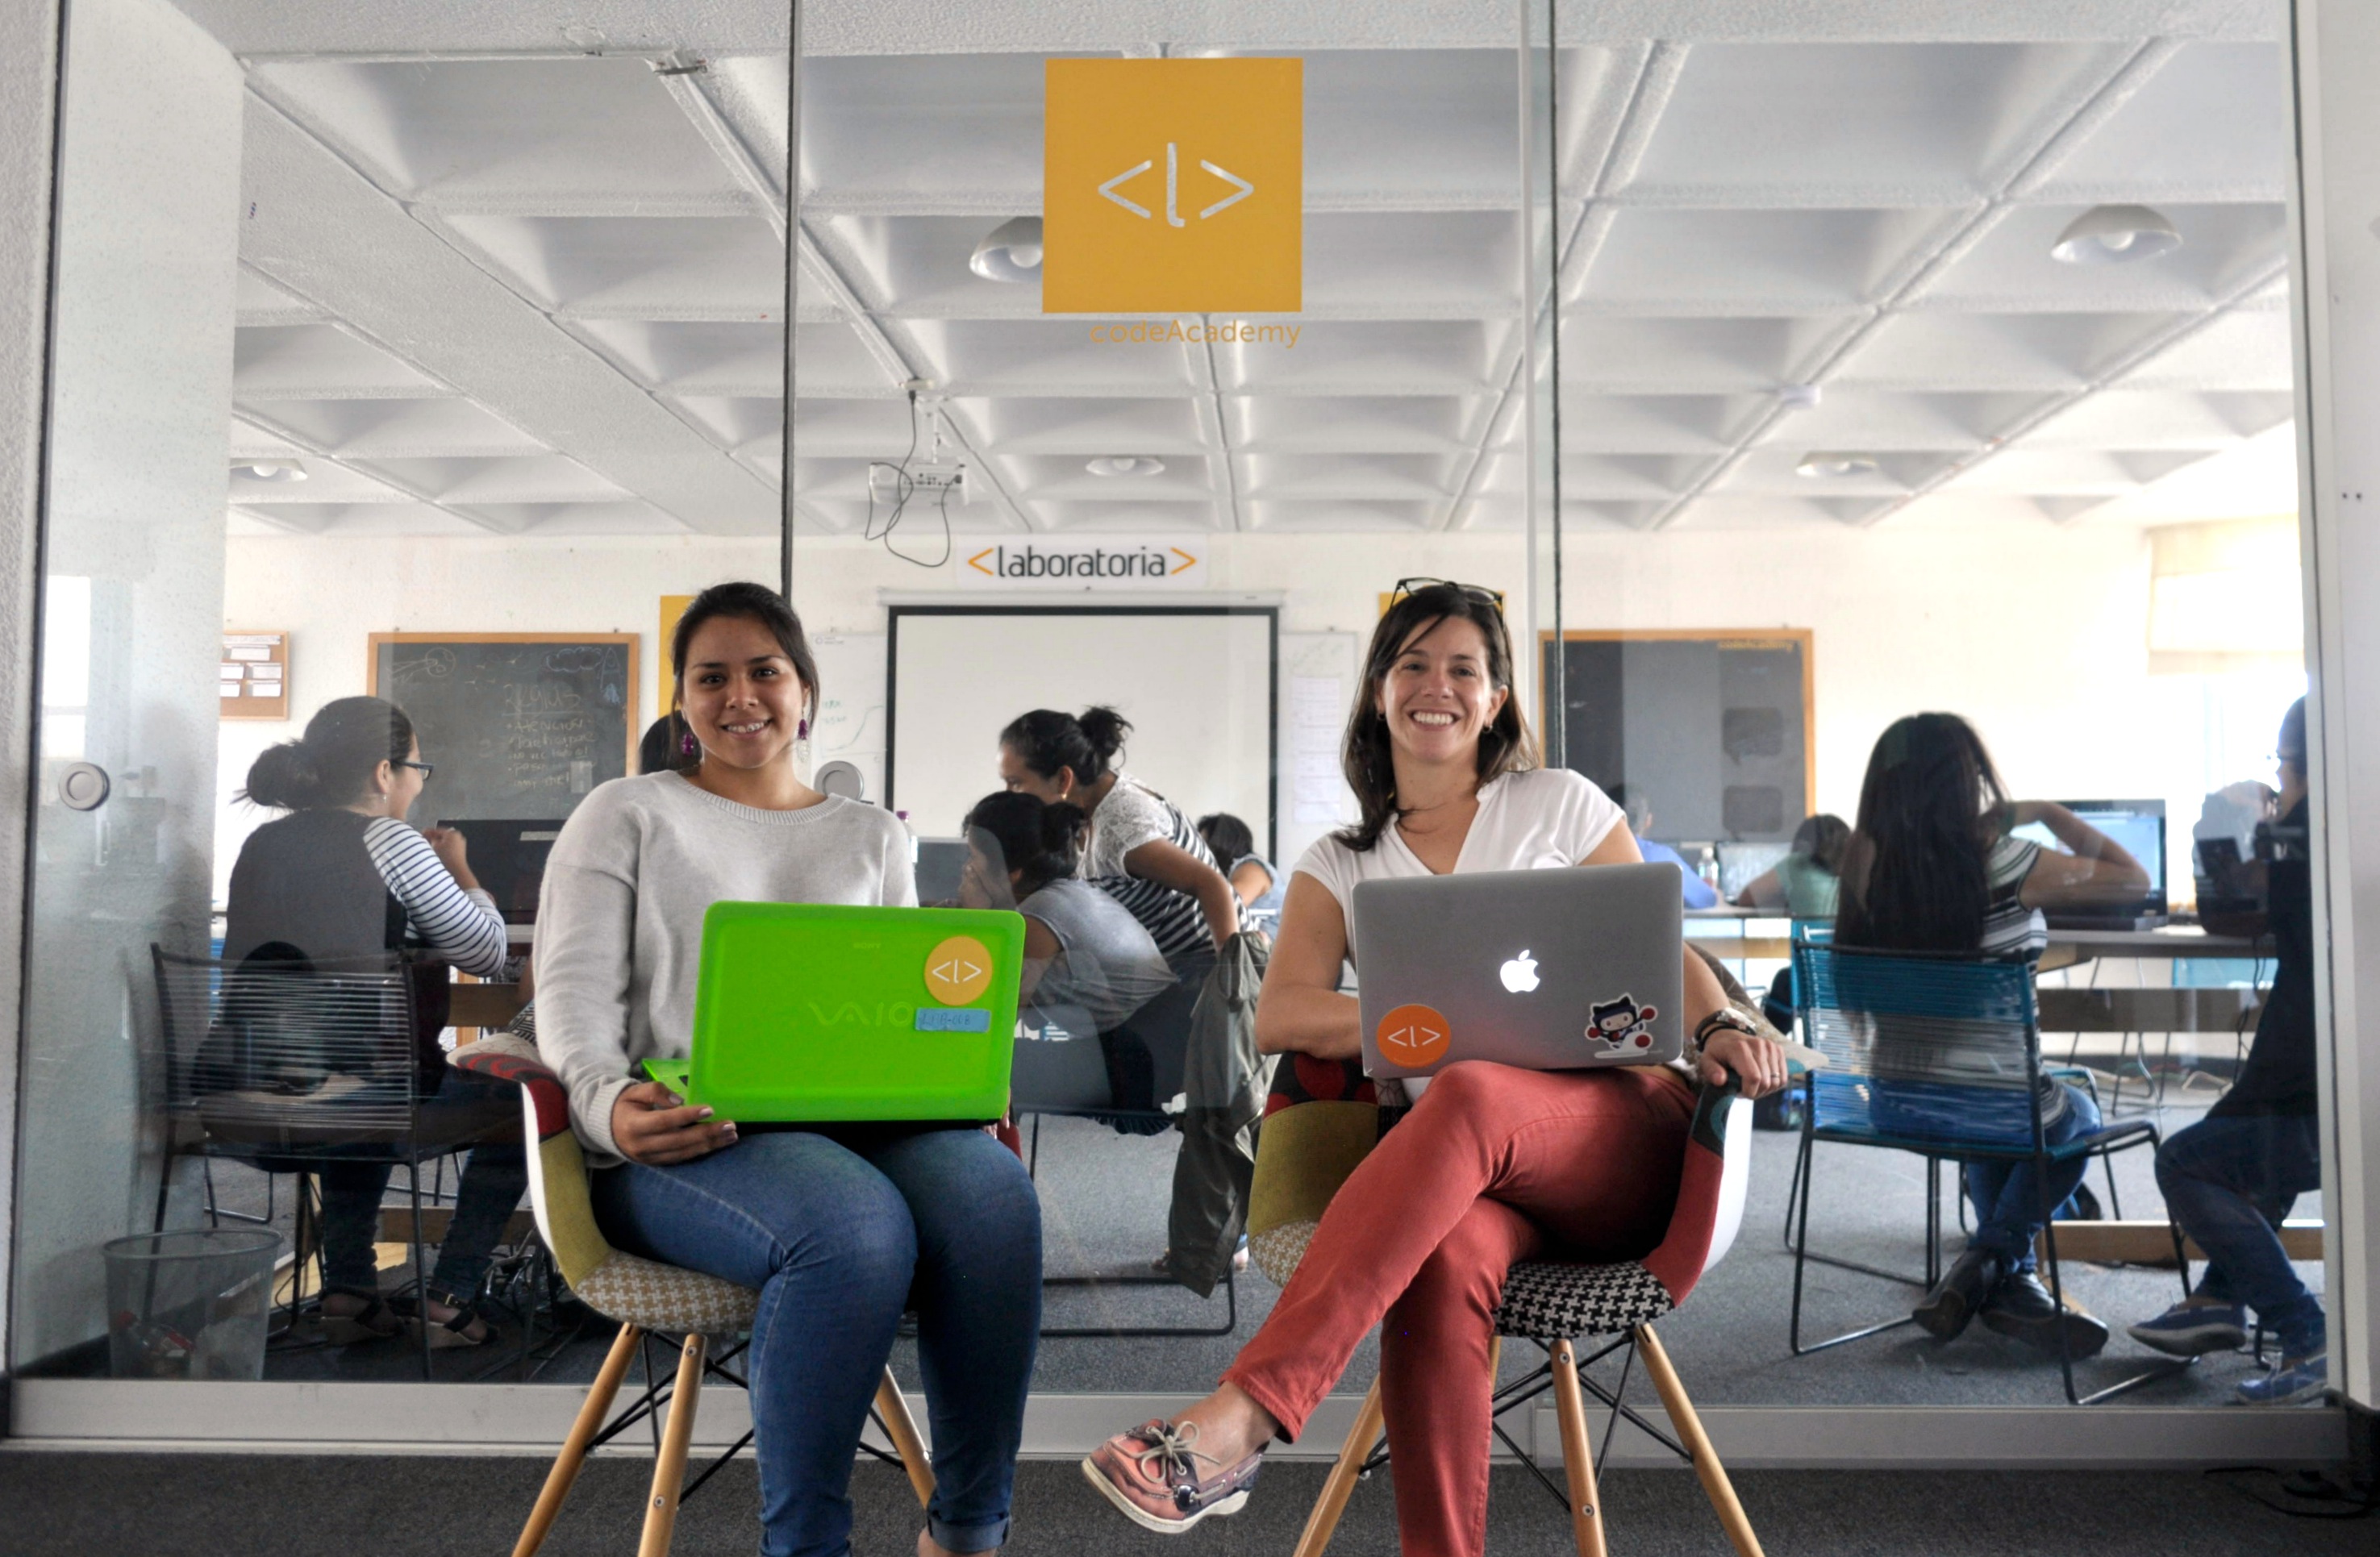 Laboratoria student Reina Torrejon poses with regional director Ana Maria Martinez in front of the Lima, Peru classroom where she and her classmates are learning front-end web development.